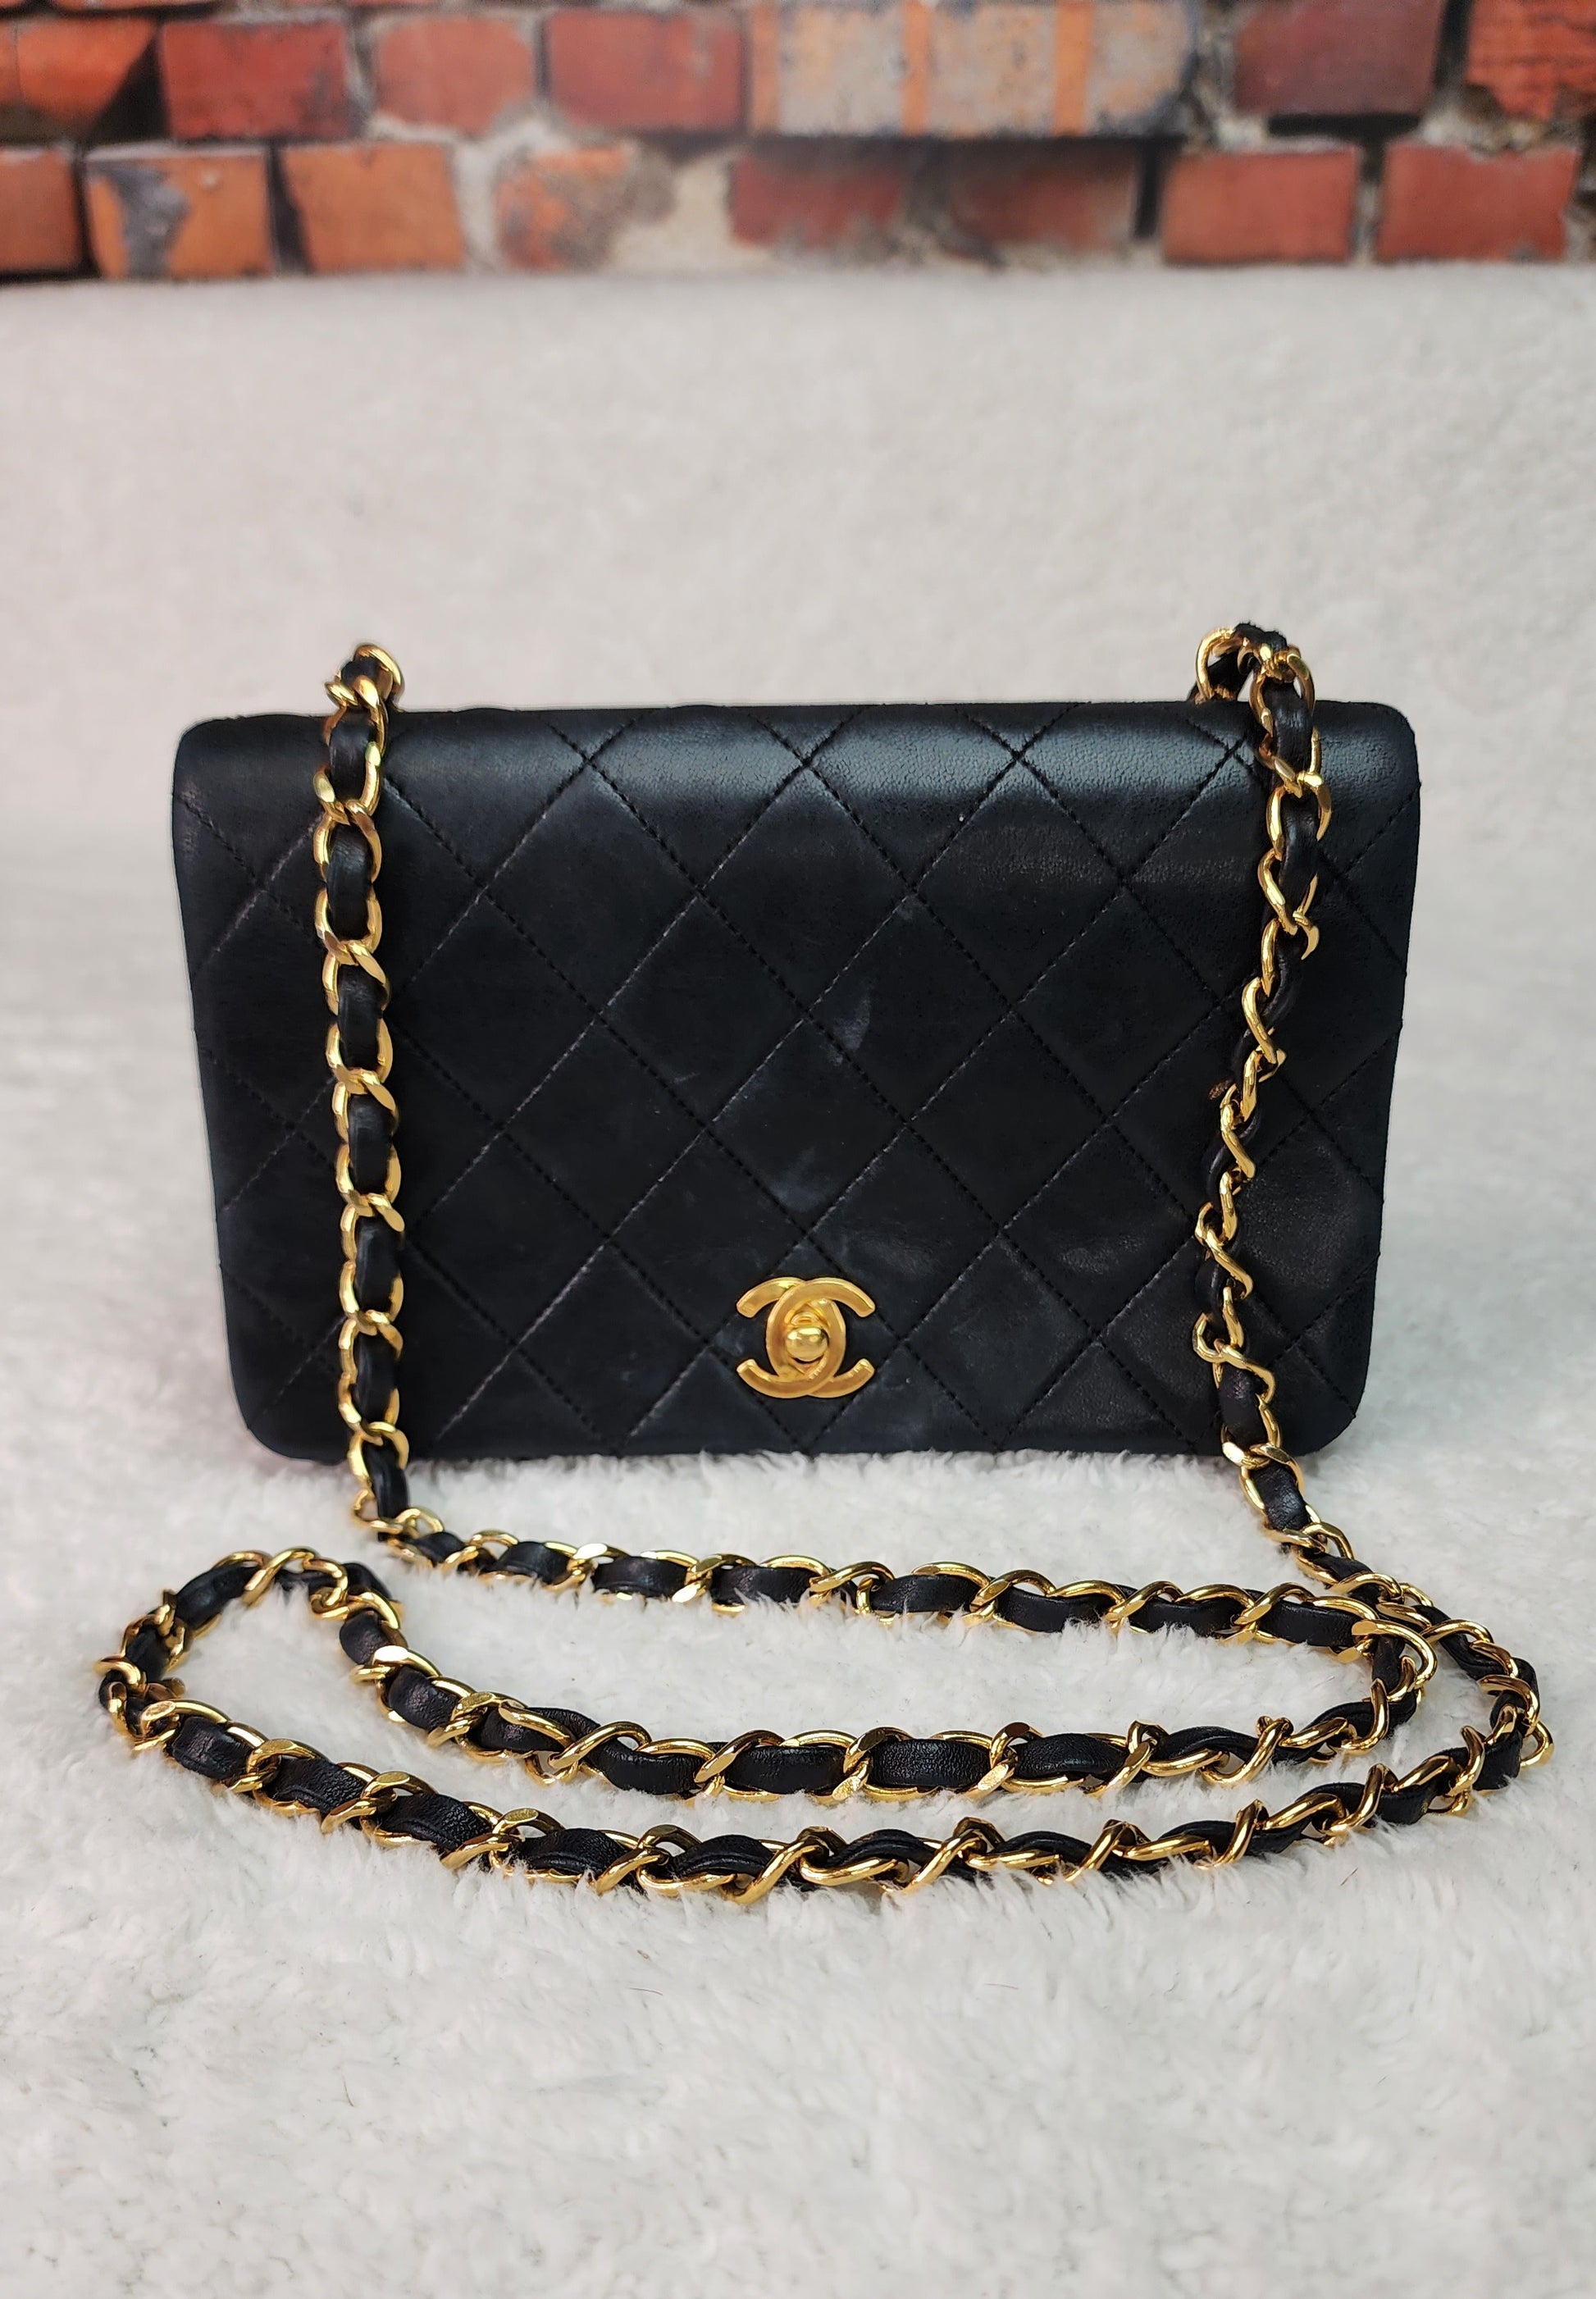 CHANEL, Bags, Final Clearance Chanel Single Flap Quilted Handbag